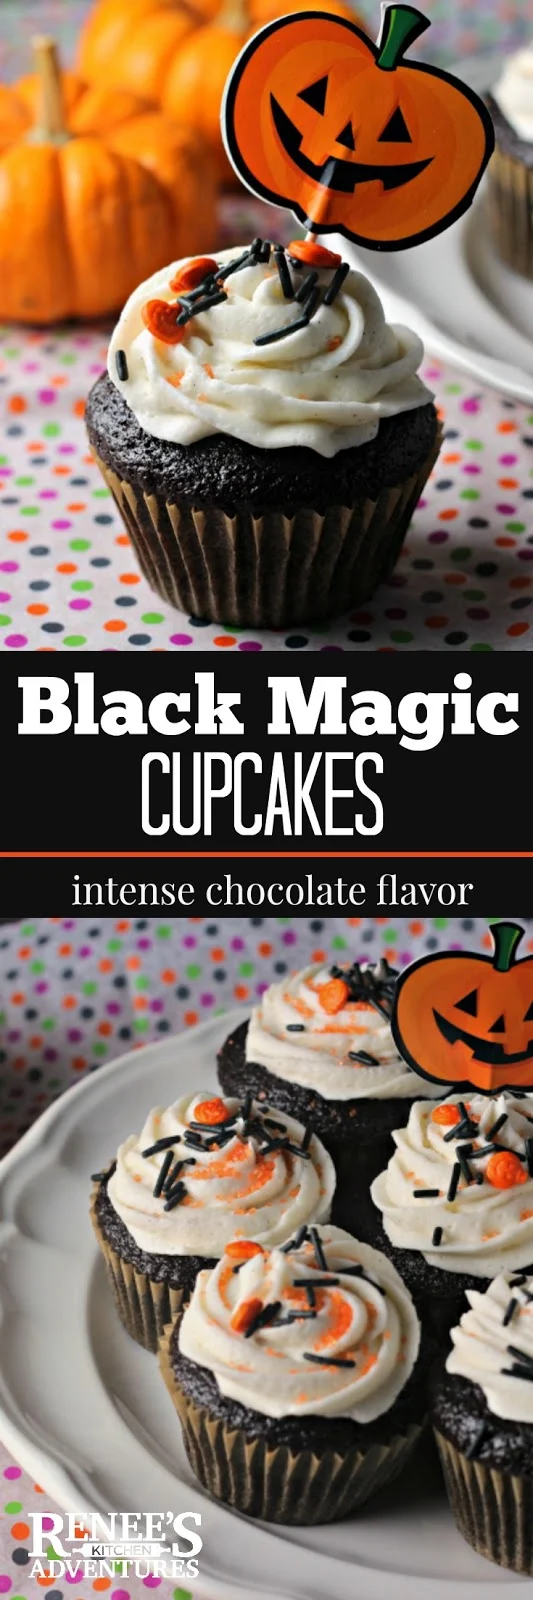 Black Magic Cupcakes with Vanilla Bean Buttercream Icing:  The BEST deep chocolate cake ever! topped with sweet vanilla bean buttercream